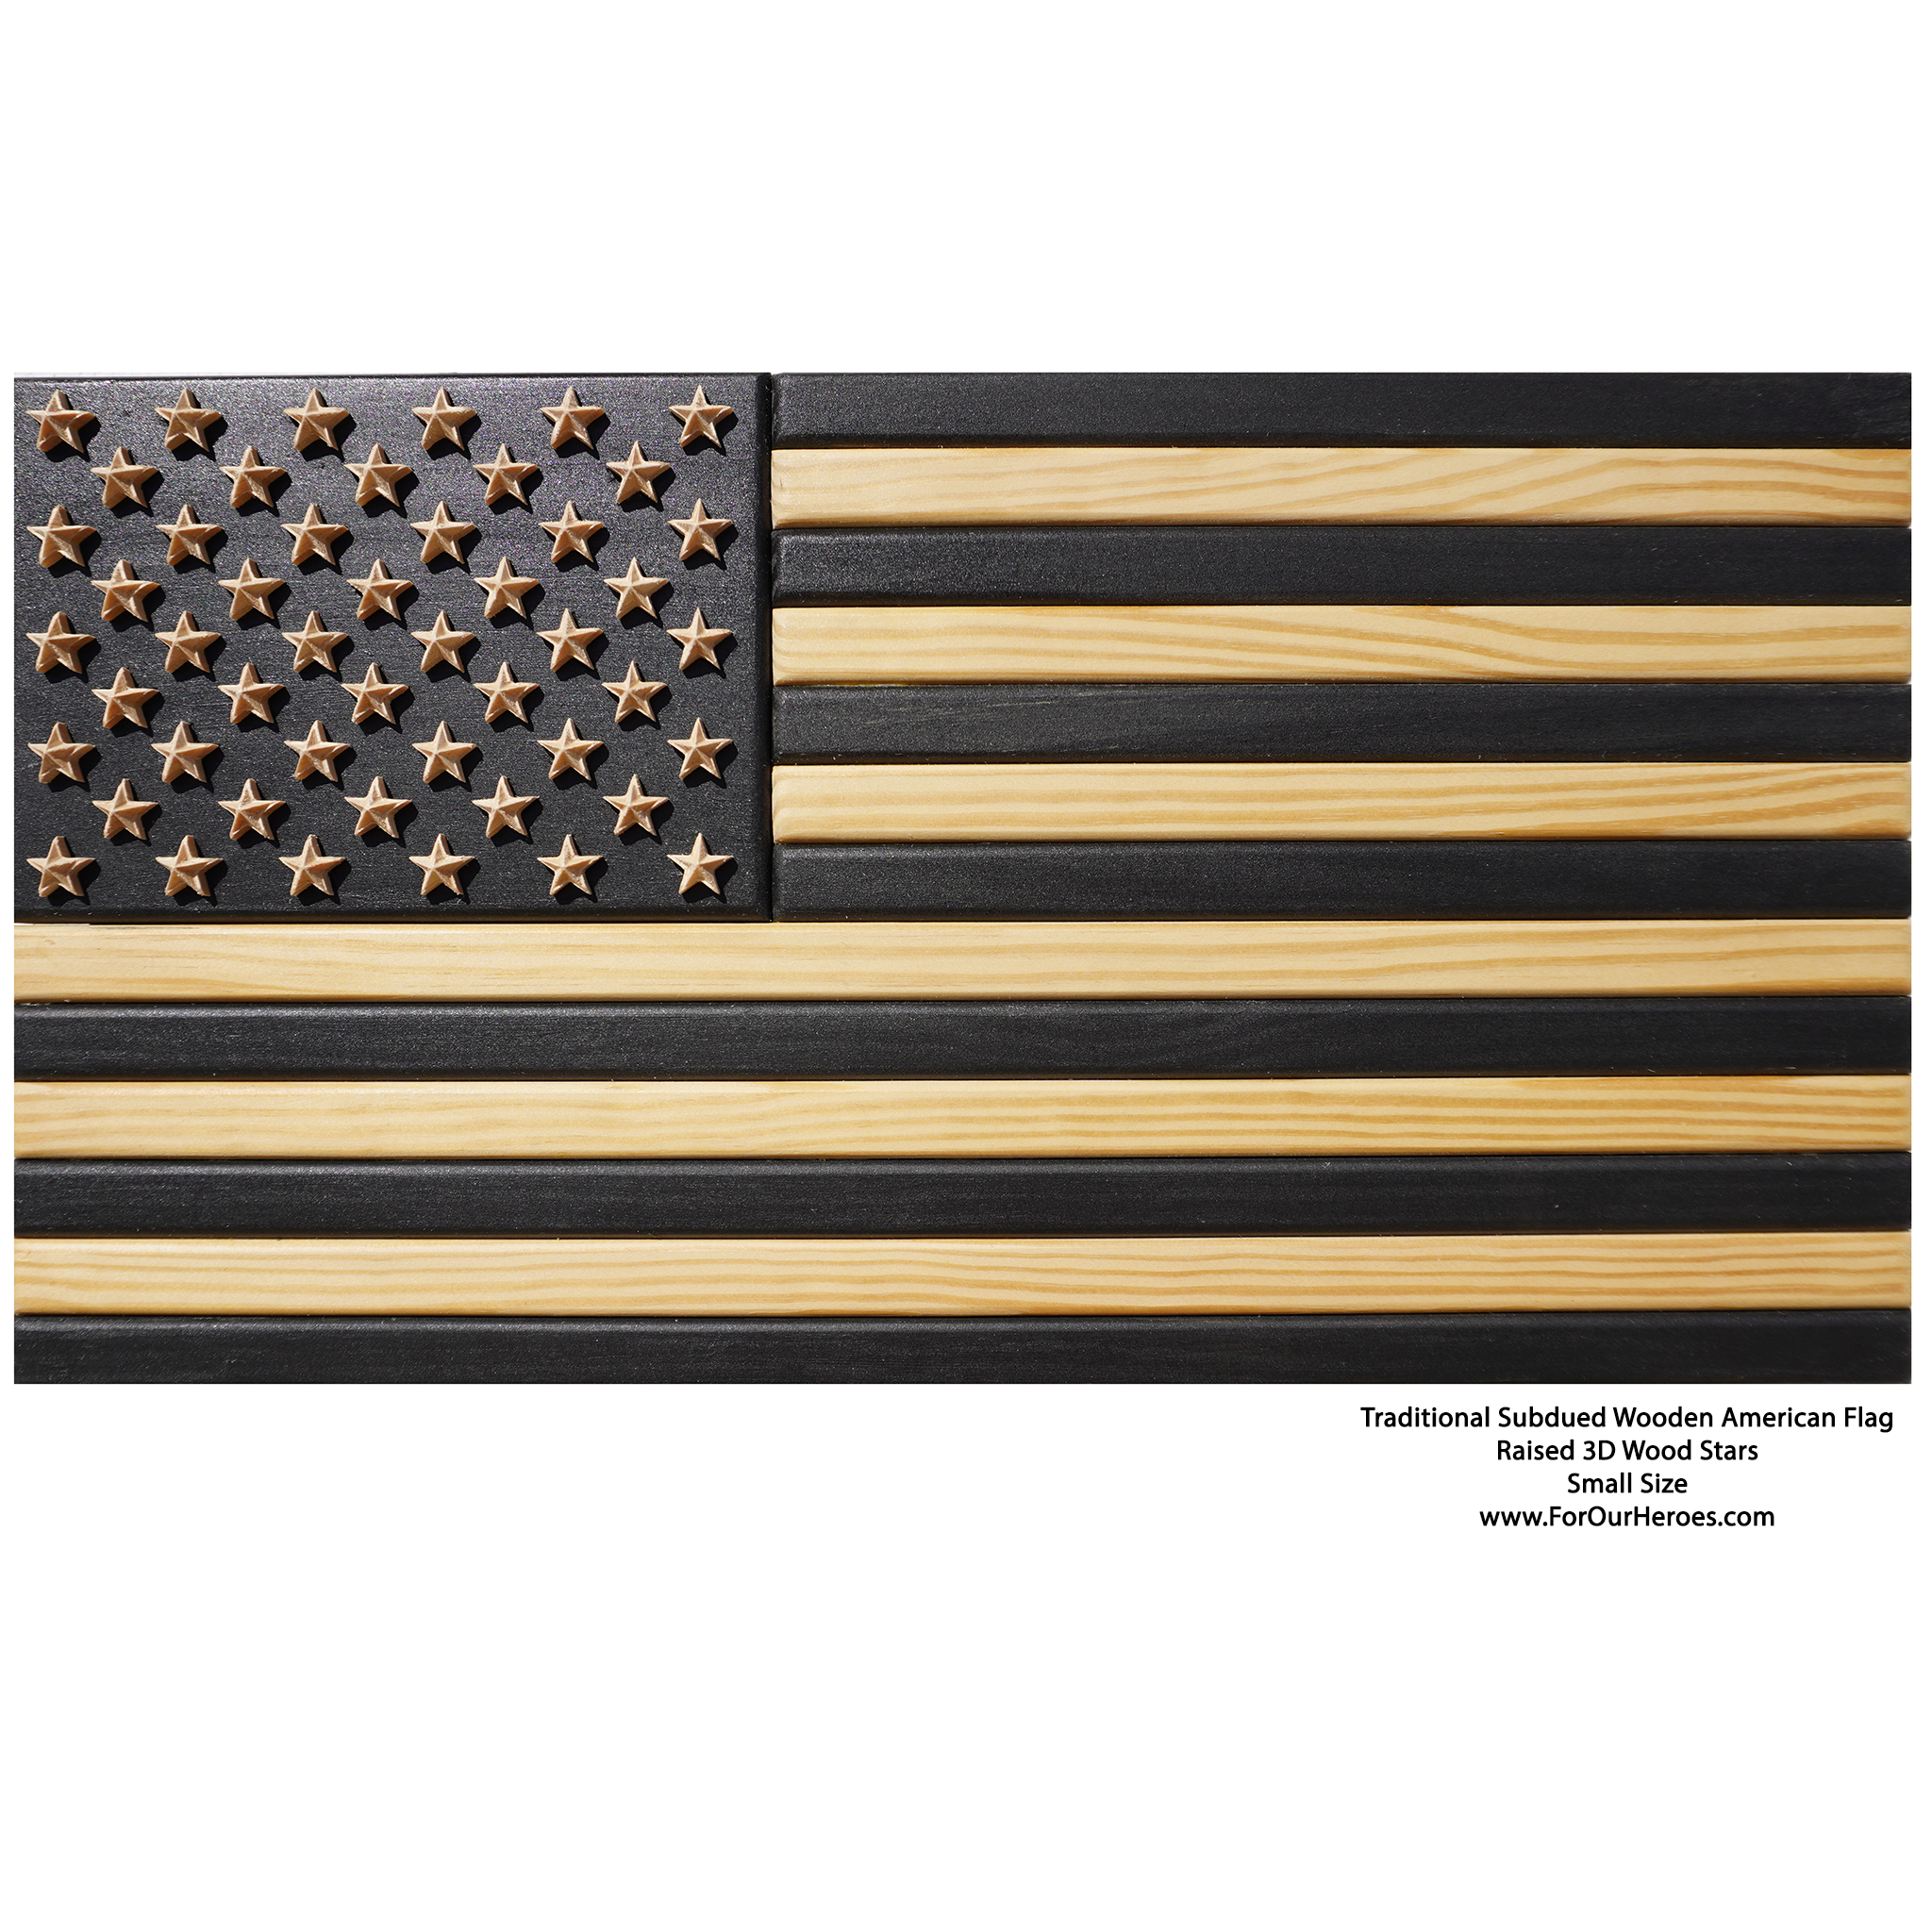 2D TRADITIONAL SUBDUED American Flag (TRUE 3D Raised Stars) - 0